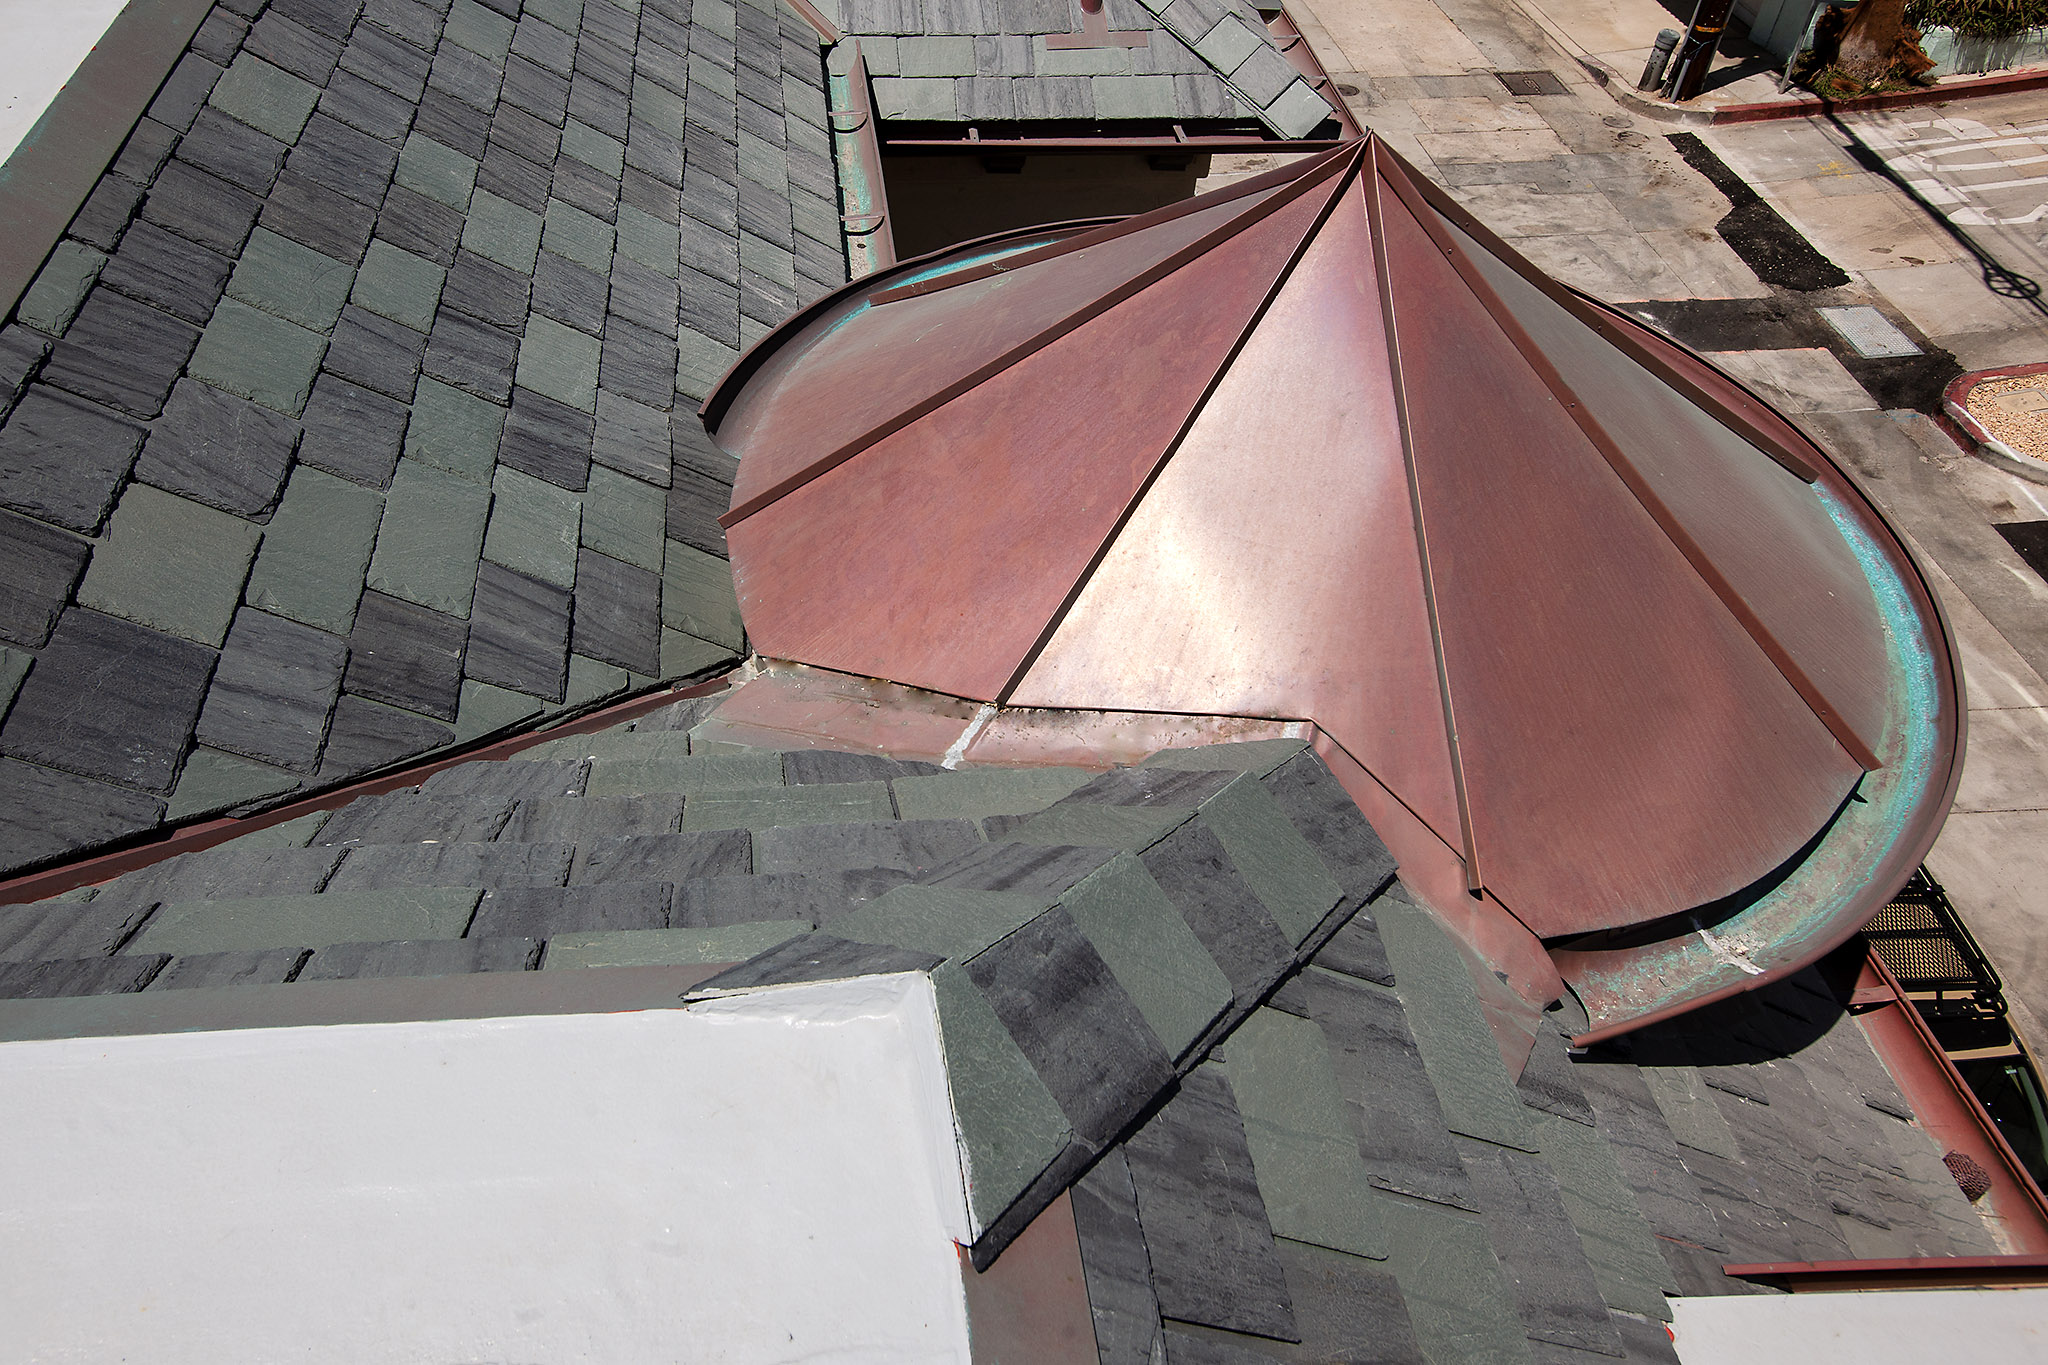 Slate roof with copper features on the Strand, Manhattan Beach, California